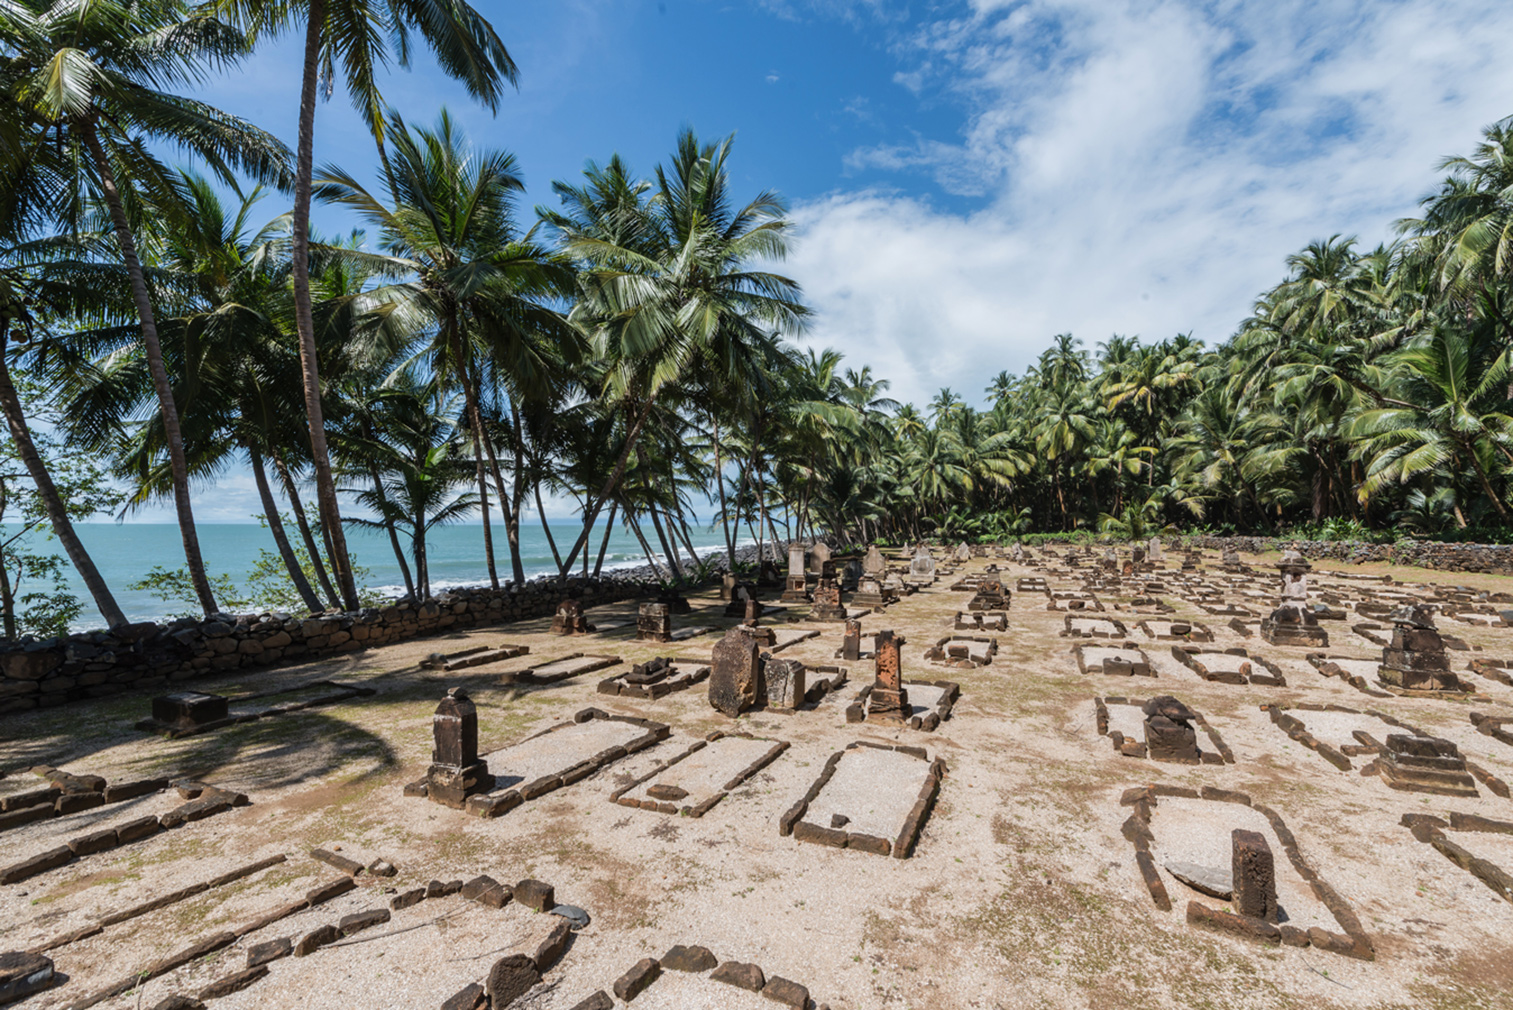 Explore the ruins of a notorious French penal colony